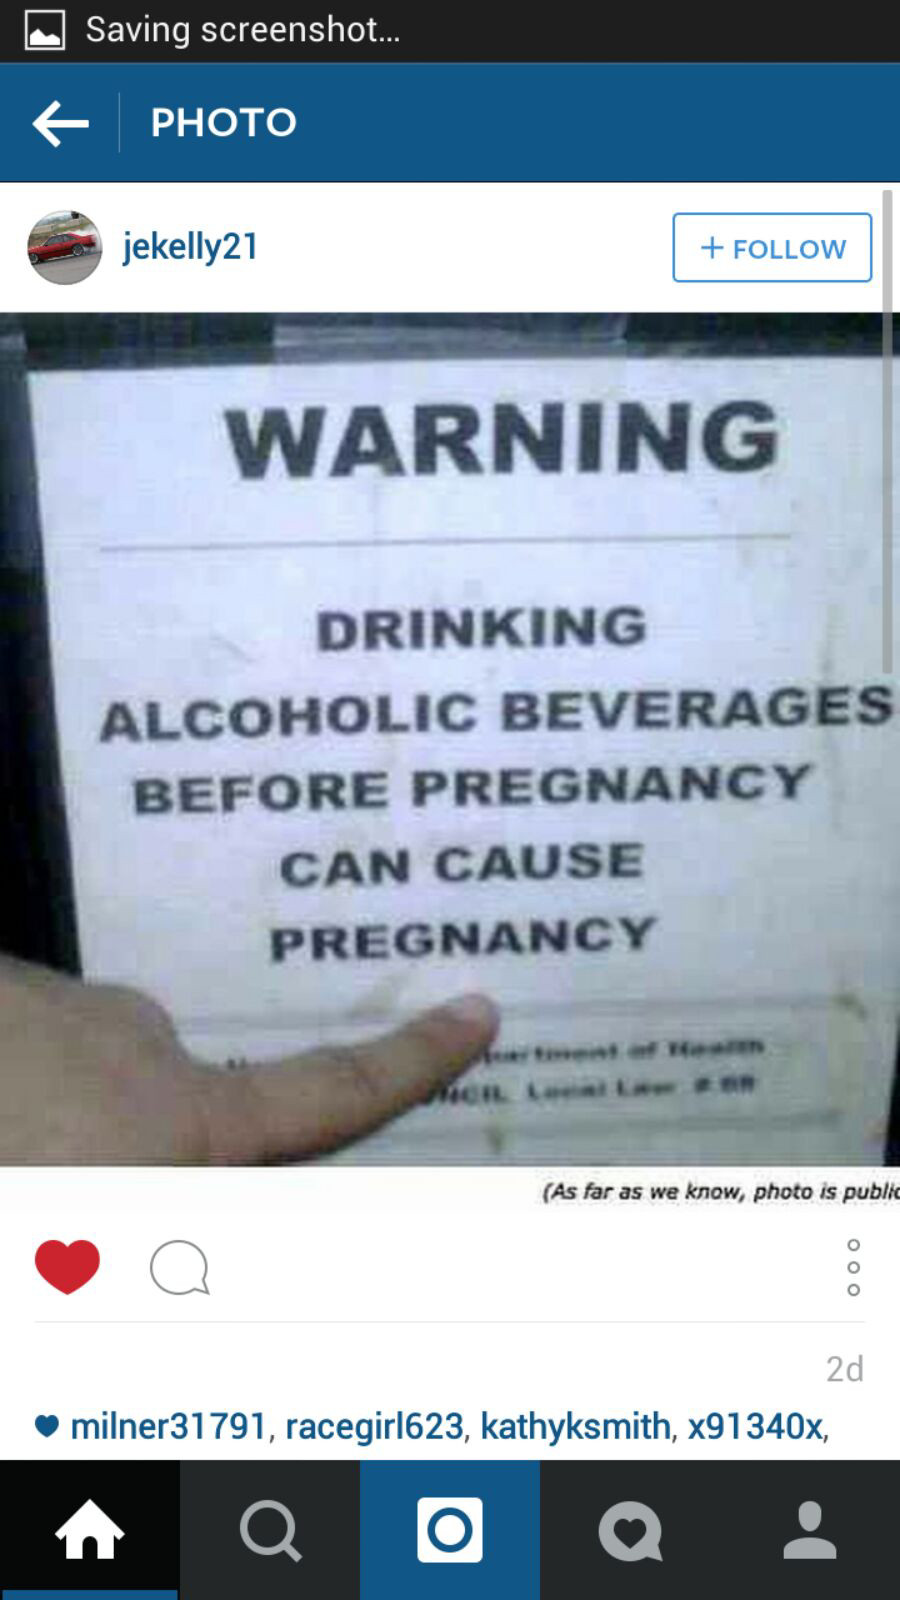 Please do not drink while pregnant. It will get the baby preggers. - meme